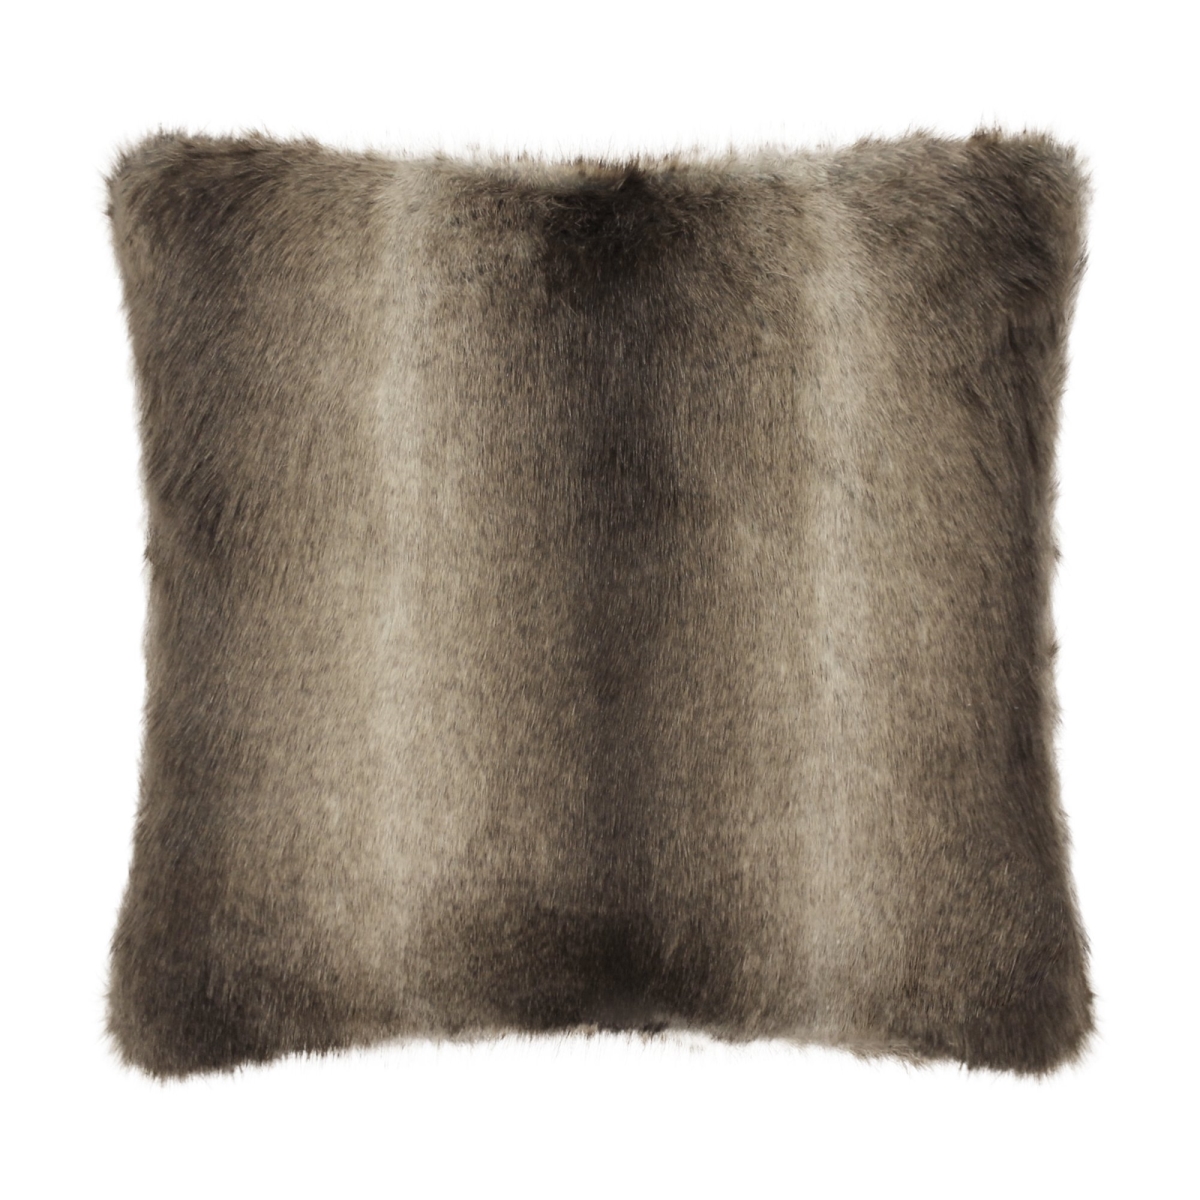 Sq-pi-fther-wbeff-1818 18 X 18 In. Wolf Faux Fur Decorative Cushion, Beige - 100 Percent Duck Feather